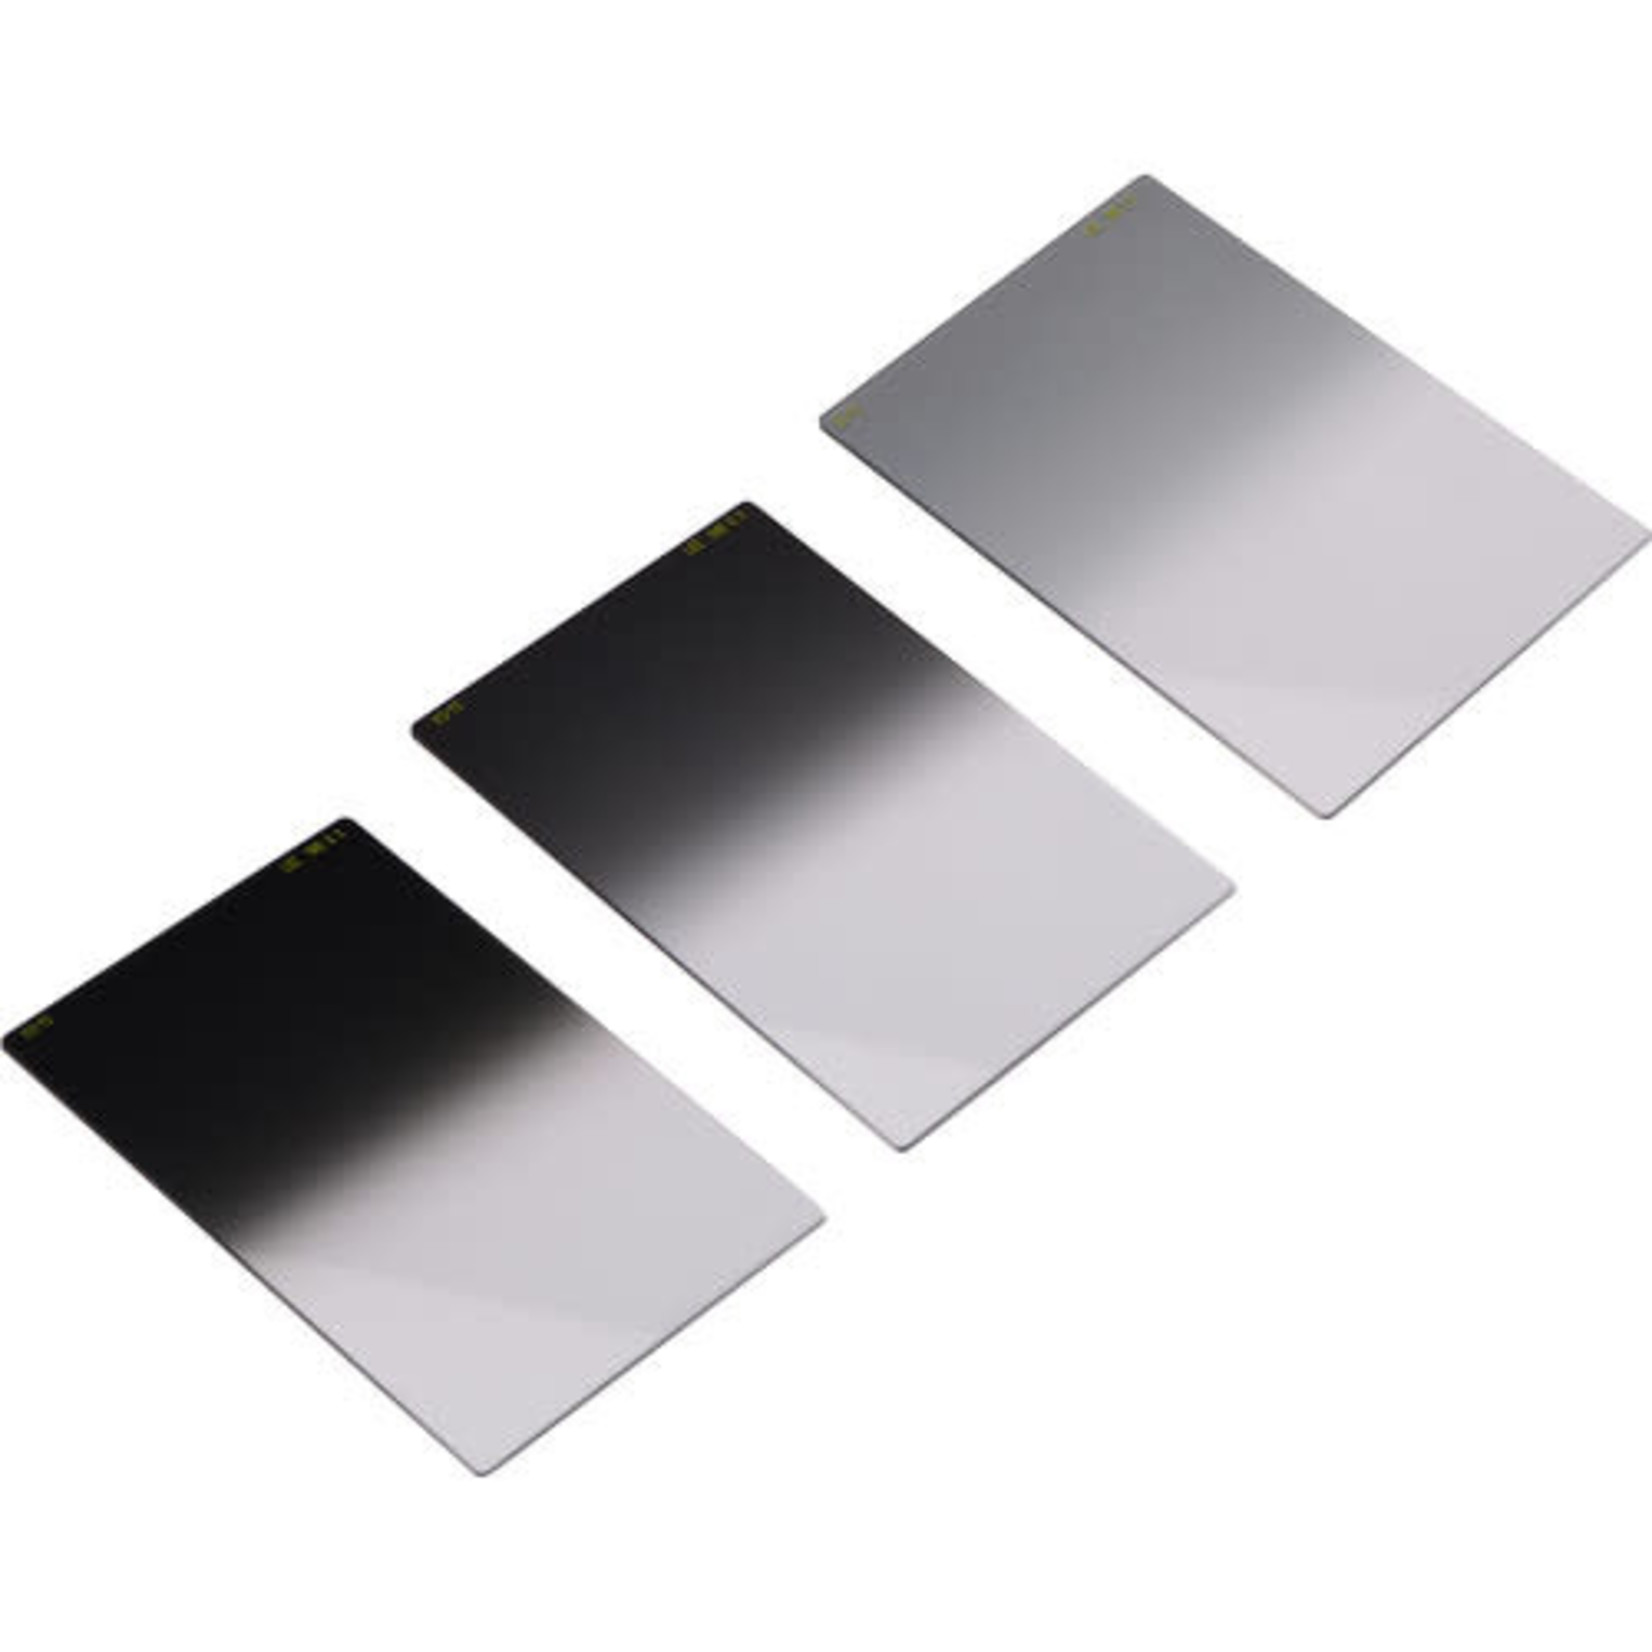 Lee LEE Filters Graduated Neutral Density Soft Filter Set 4 x 6" - Consists of Three Graduated ND (Neutral Density) Filters (.3, .6, .9) - Soft Transition